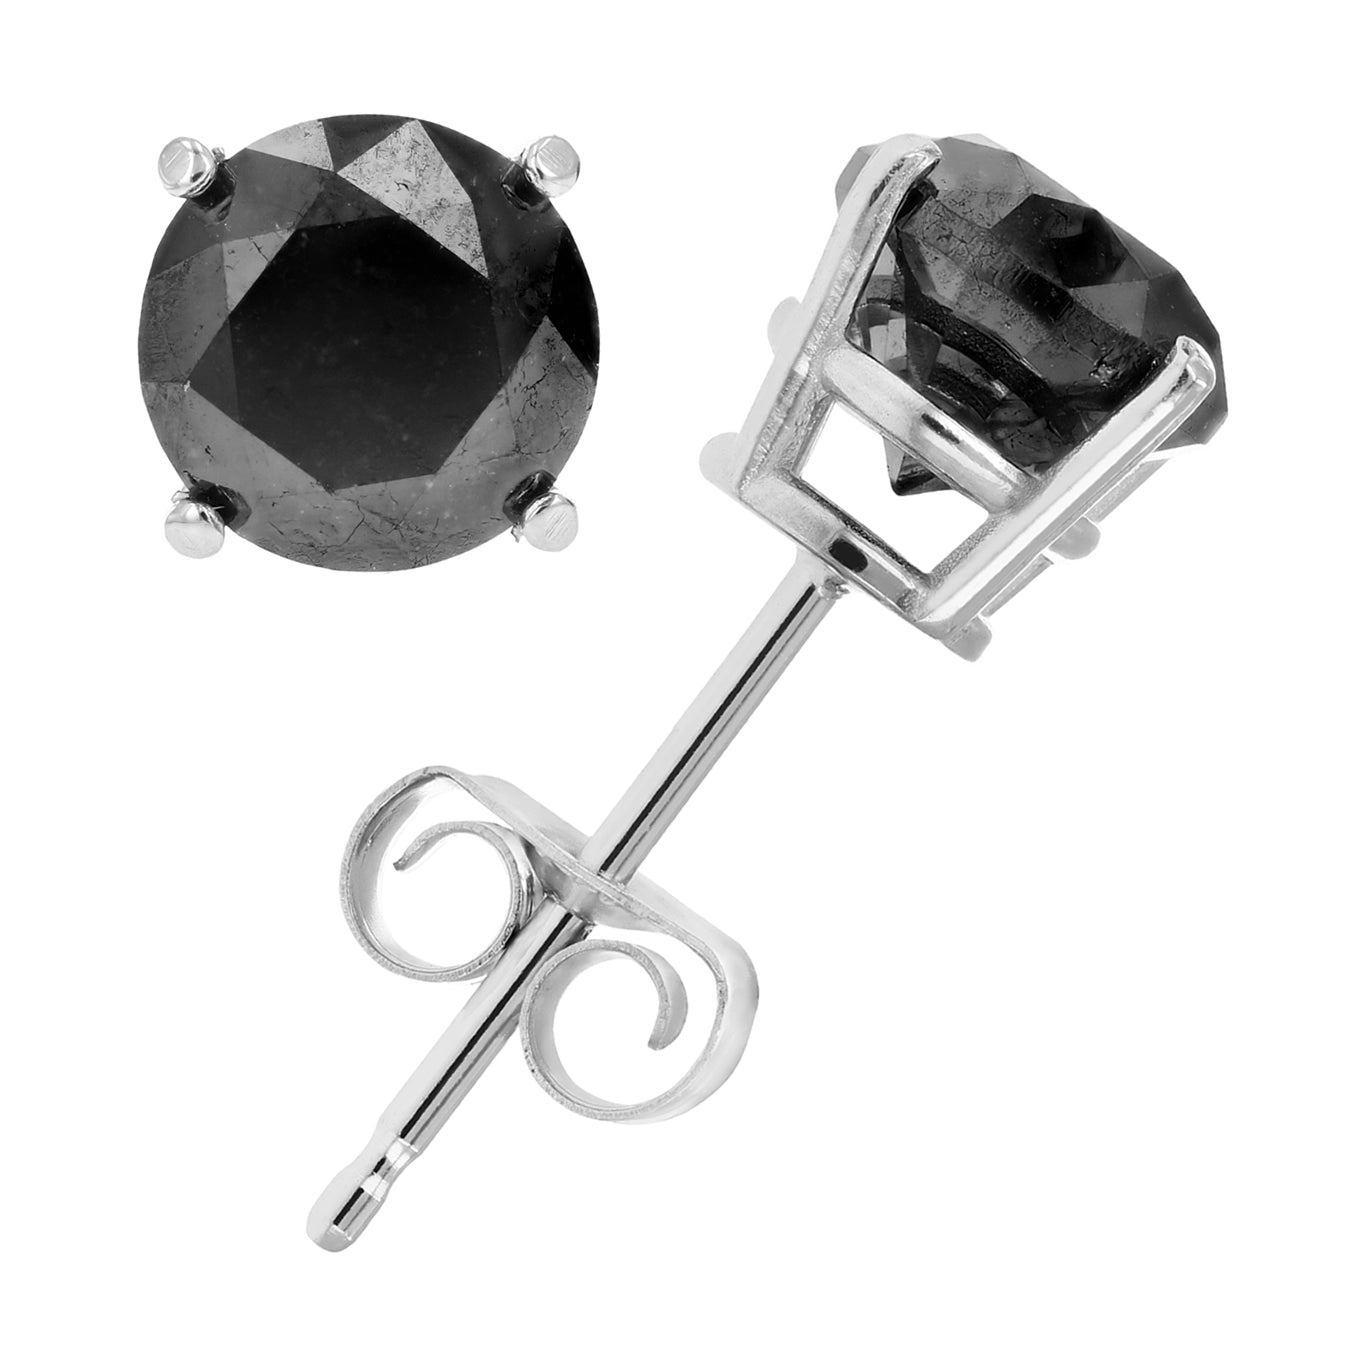 5 cttw Black Diamond Stud Earrings .925 Sterling Silver Round with Push Backs